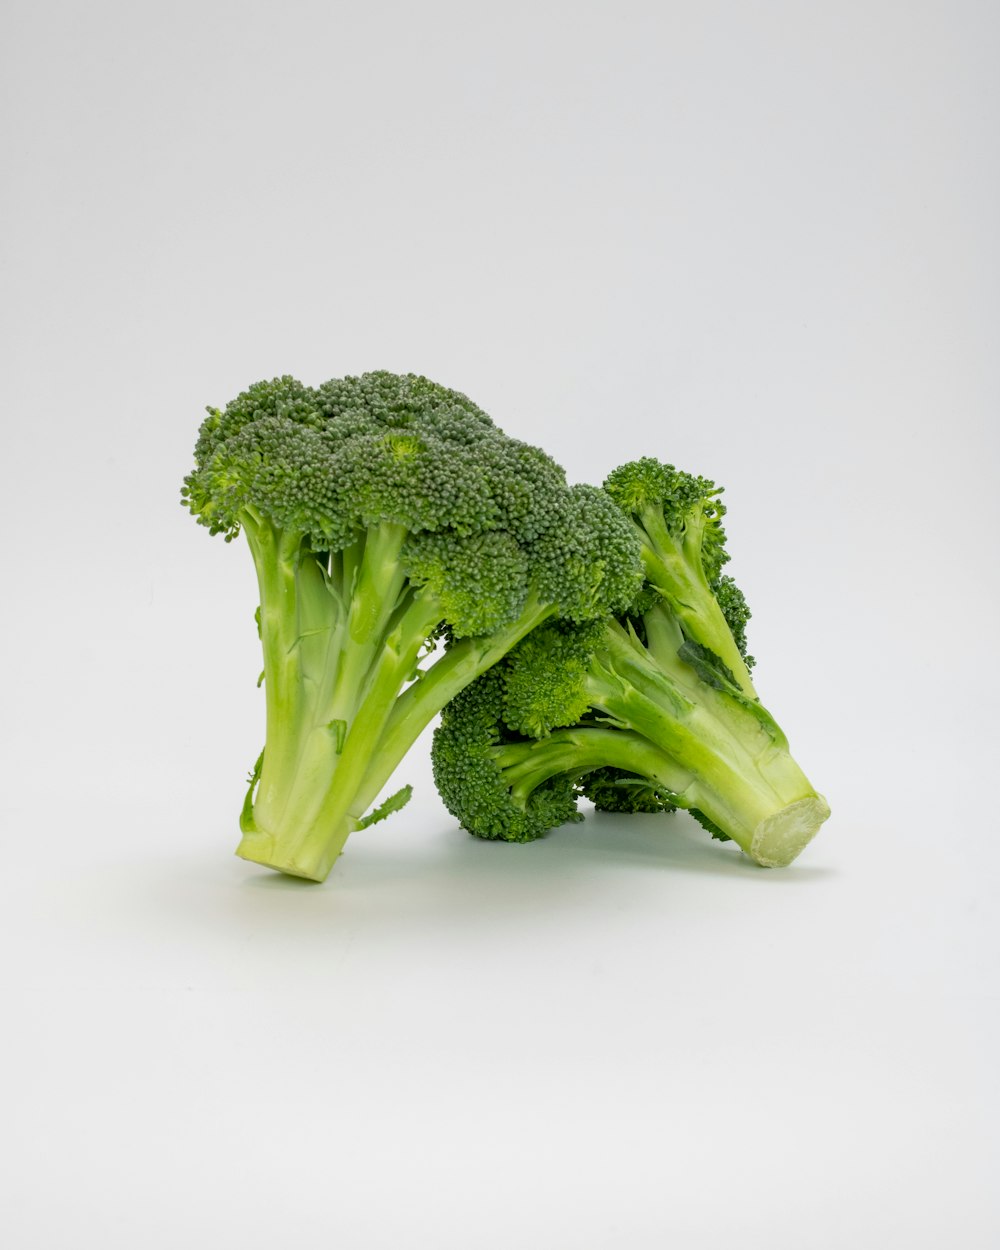 a close up of broccoli on a white background